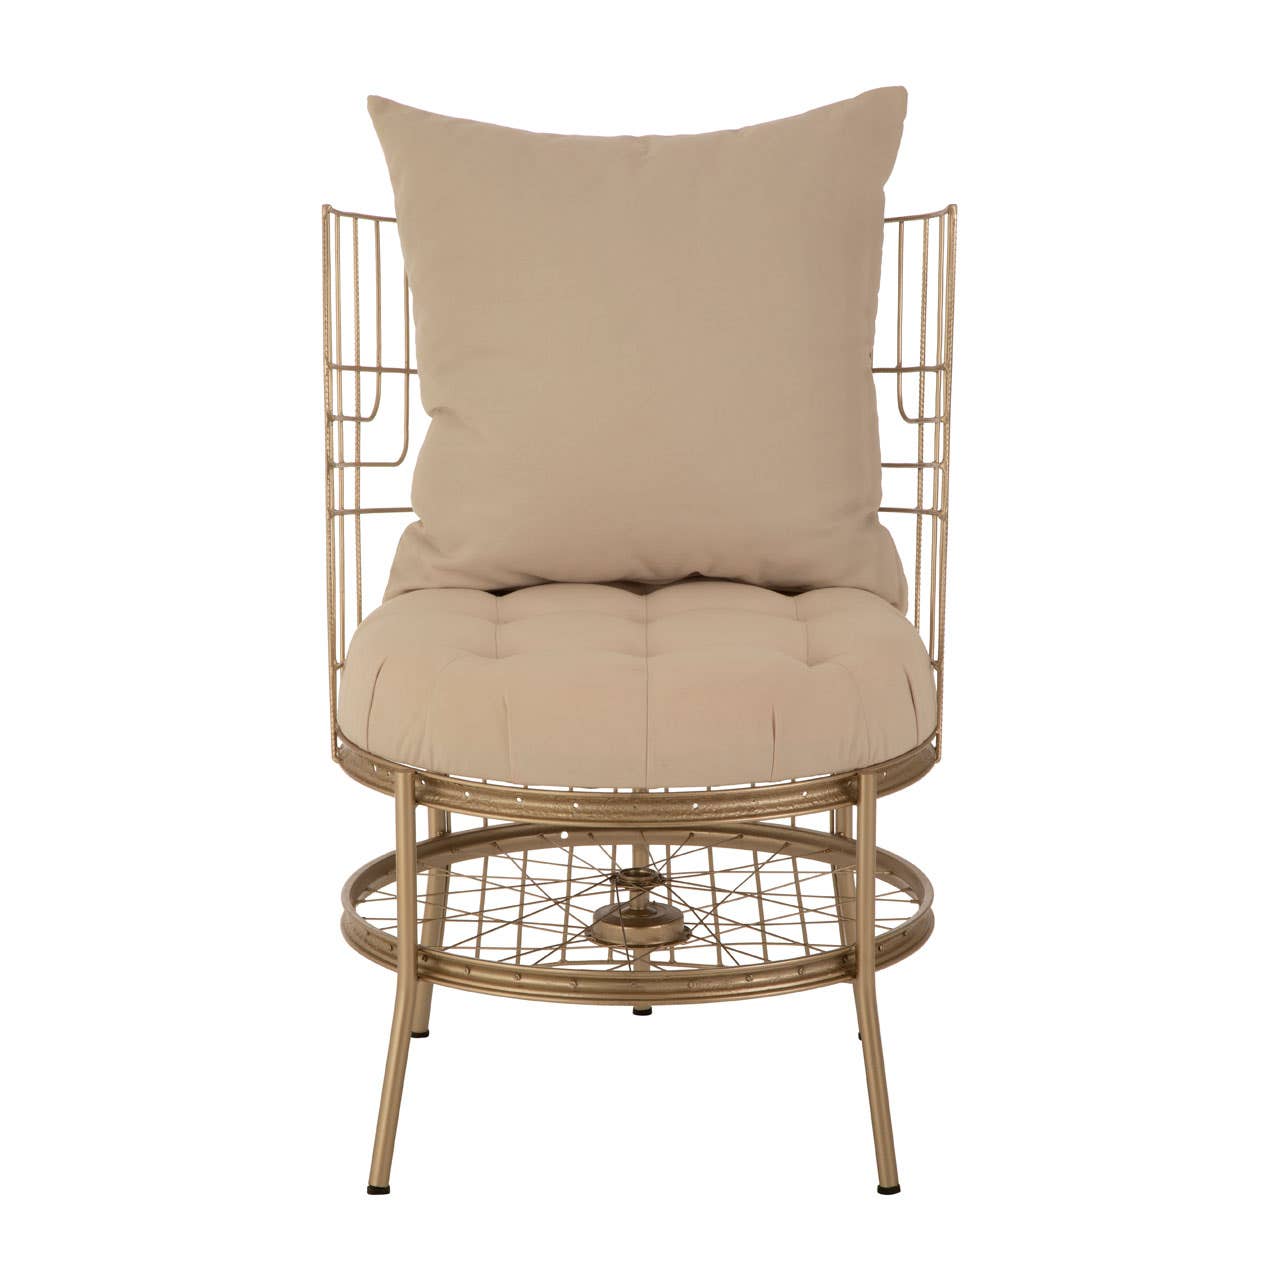 Mantis Champagne Gold Finish Chair